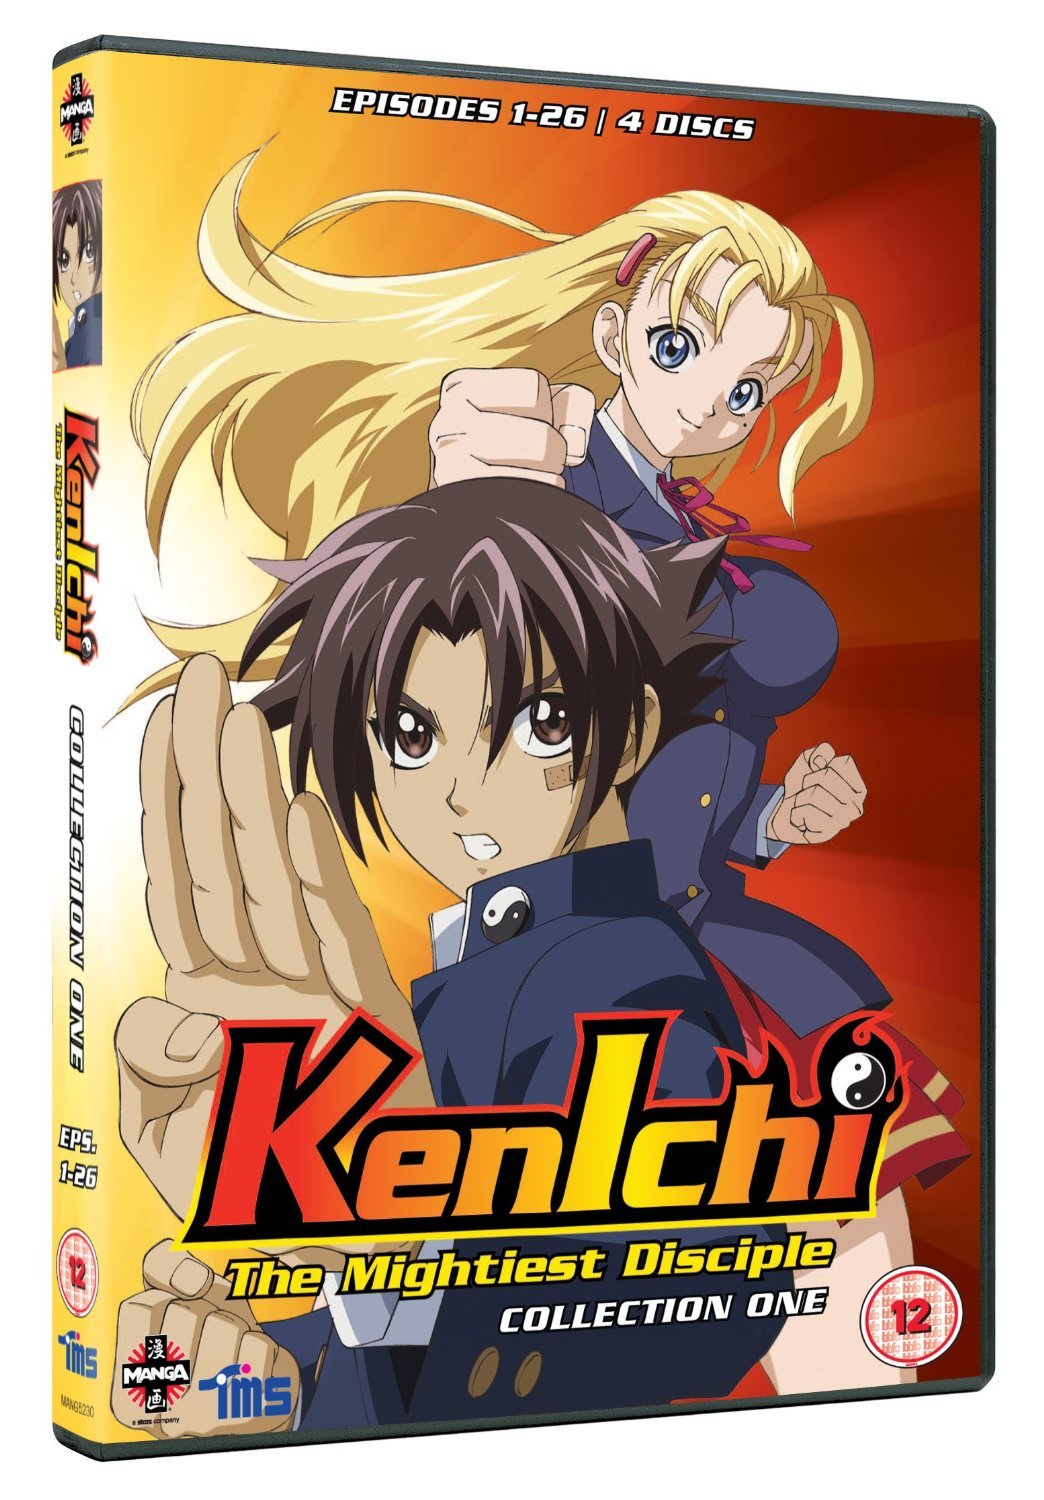 KenIchi: The Mightiest Disciple | Kenichi vs Kisara | KenIchi: The  Mightiest Disciple is streaming now: https://tmsanime.com/project/kenichi-the-mightiest-disciple  Watch on YouTube:... | By TMS Entertainment USA Inc.Facebook